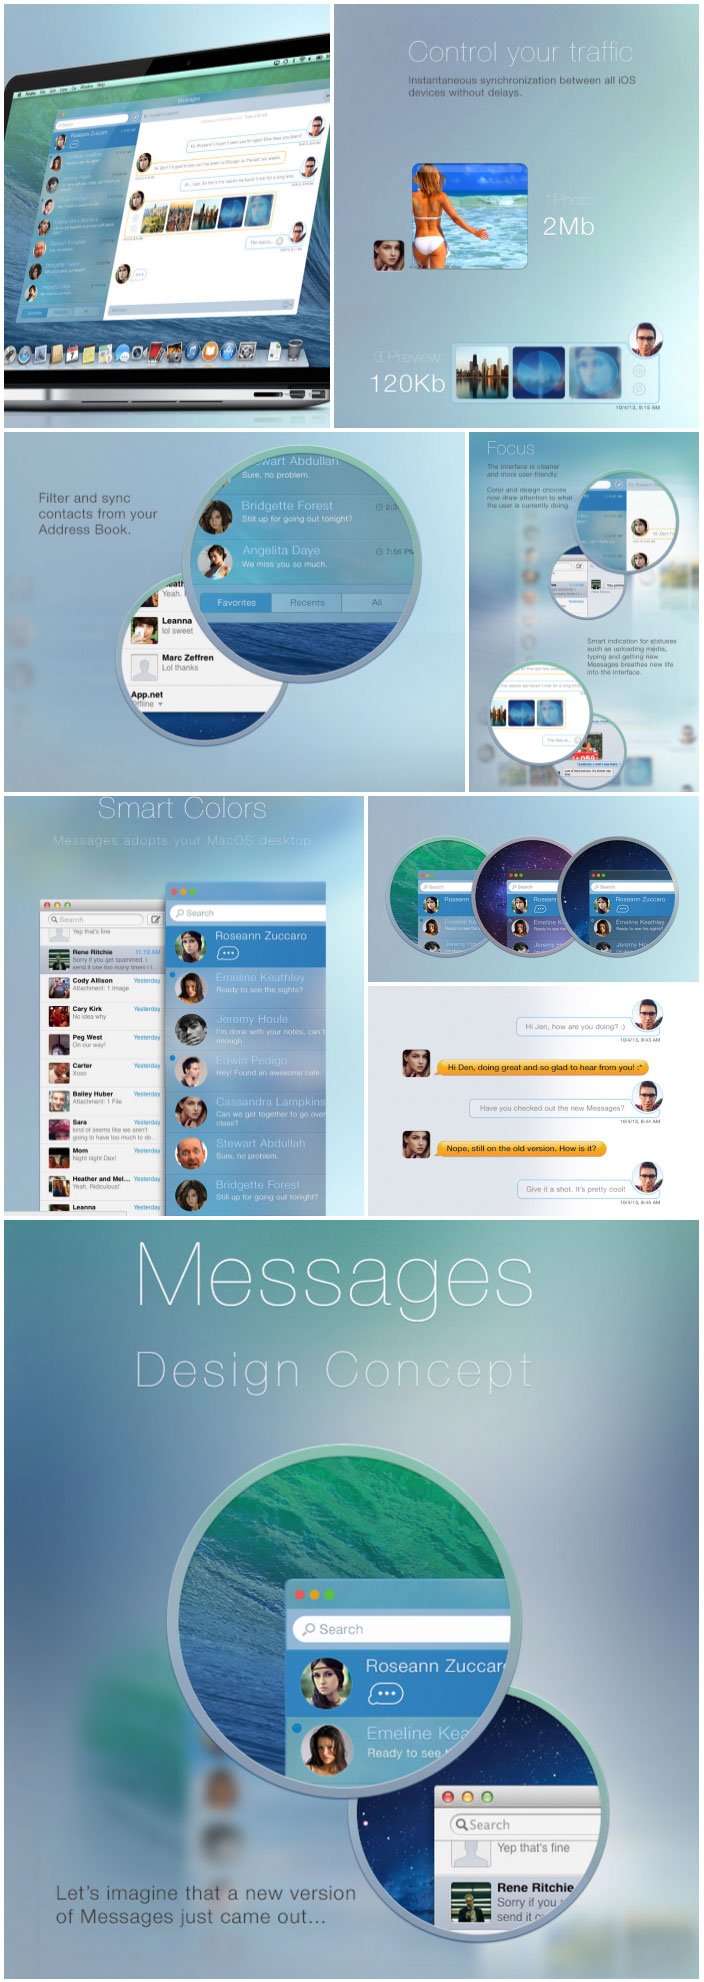 imessages-ios-7